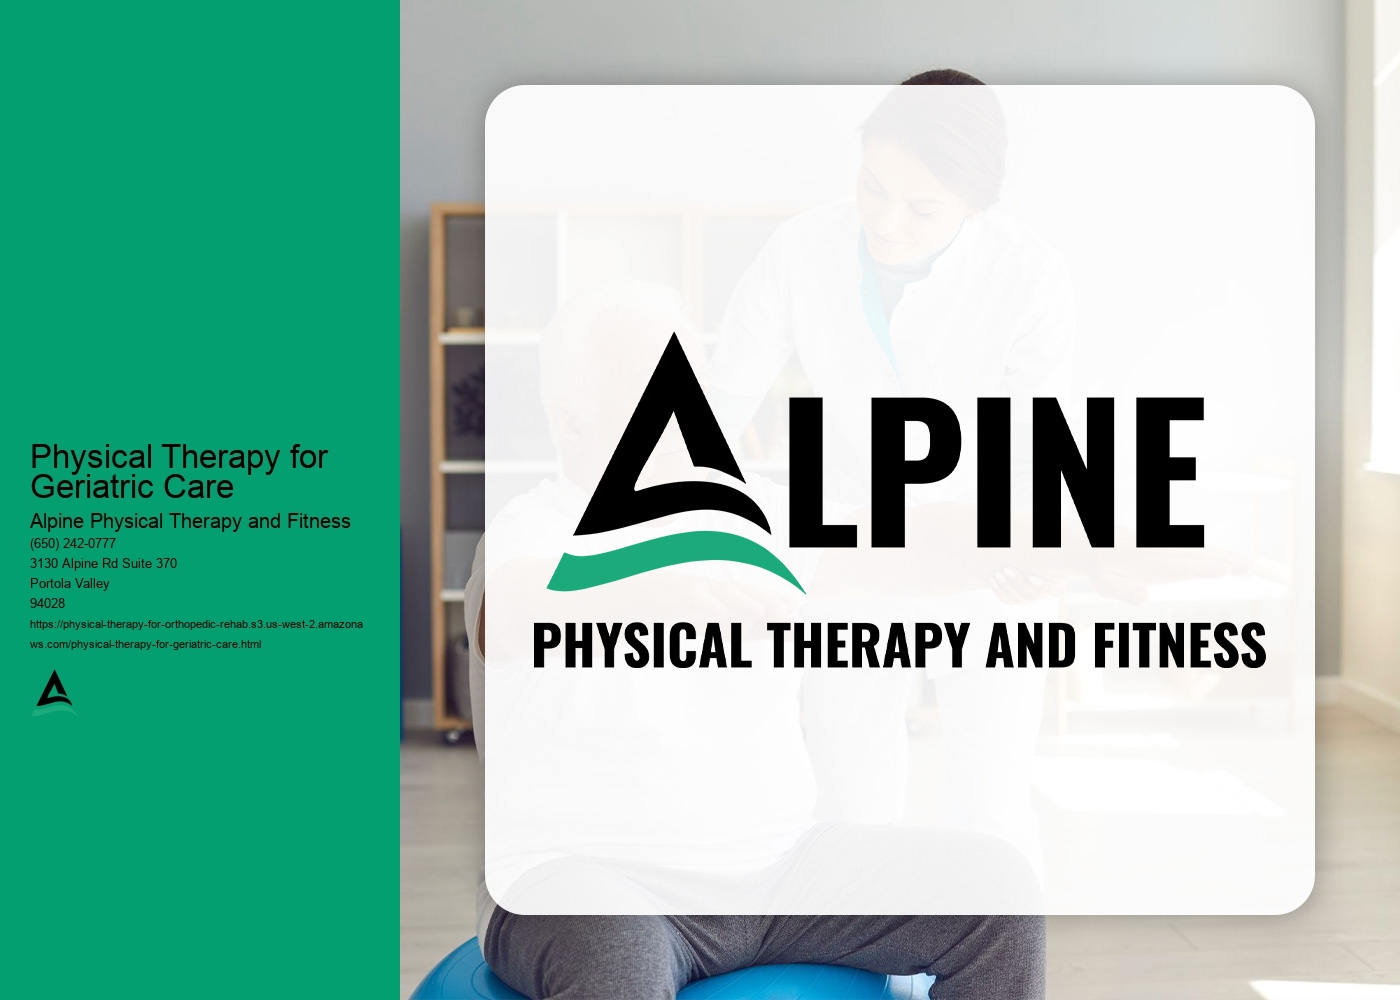 What types of exercises are typically included in a geriatric physical therapy program?